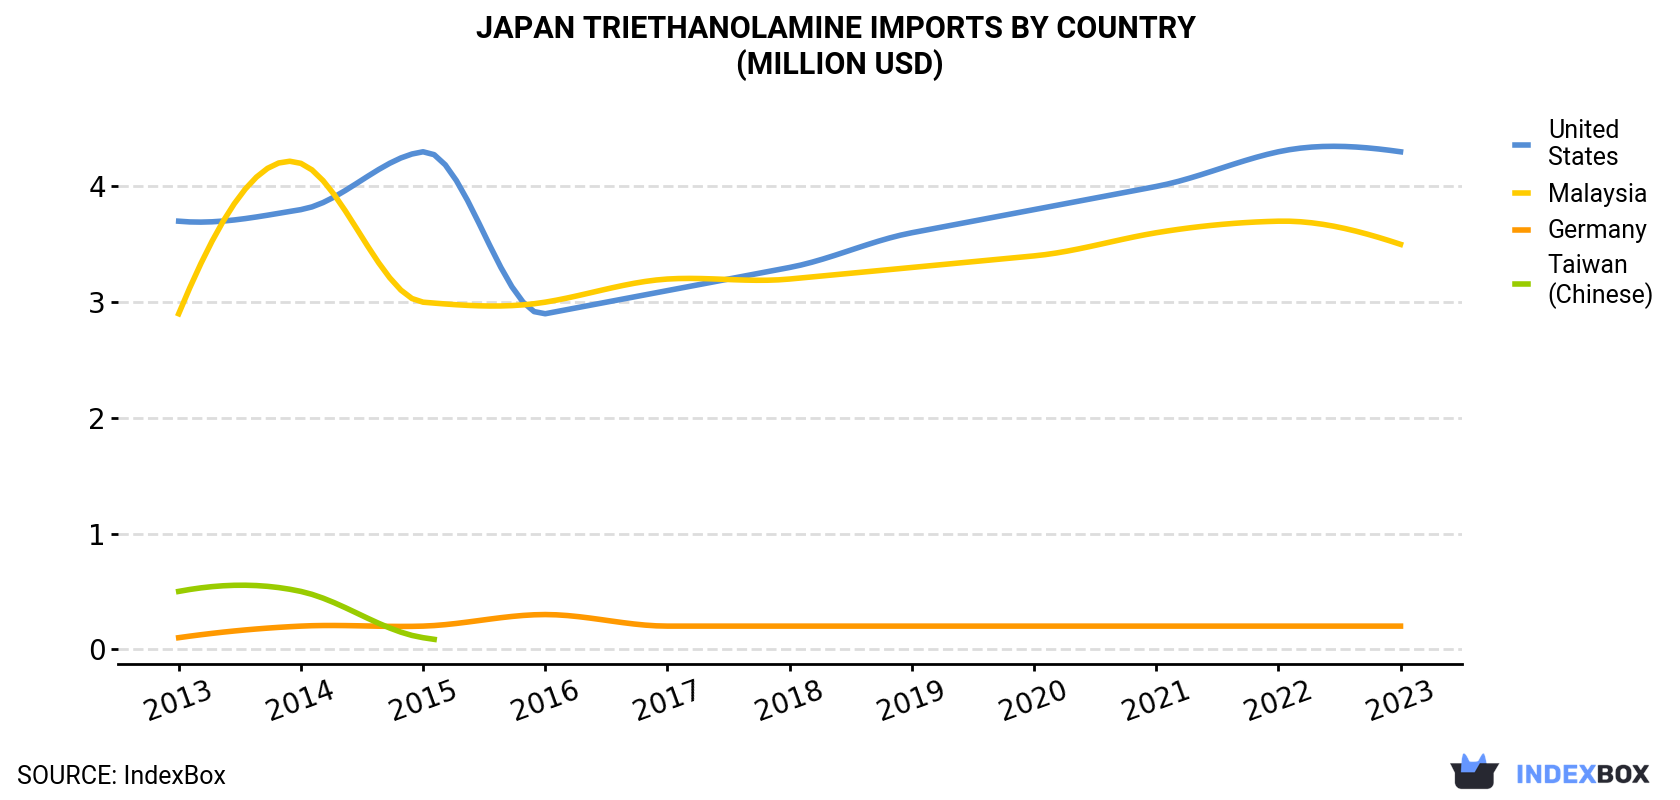 Japan Triethanolamine Imports By Country (Million USD)